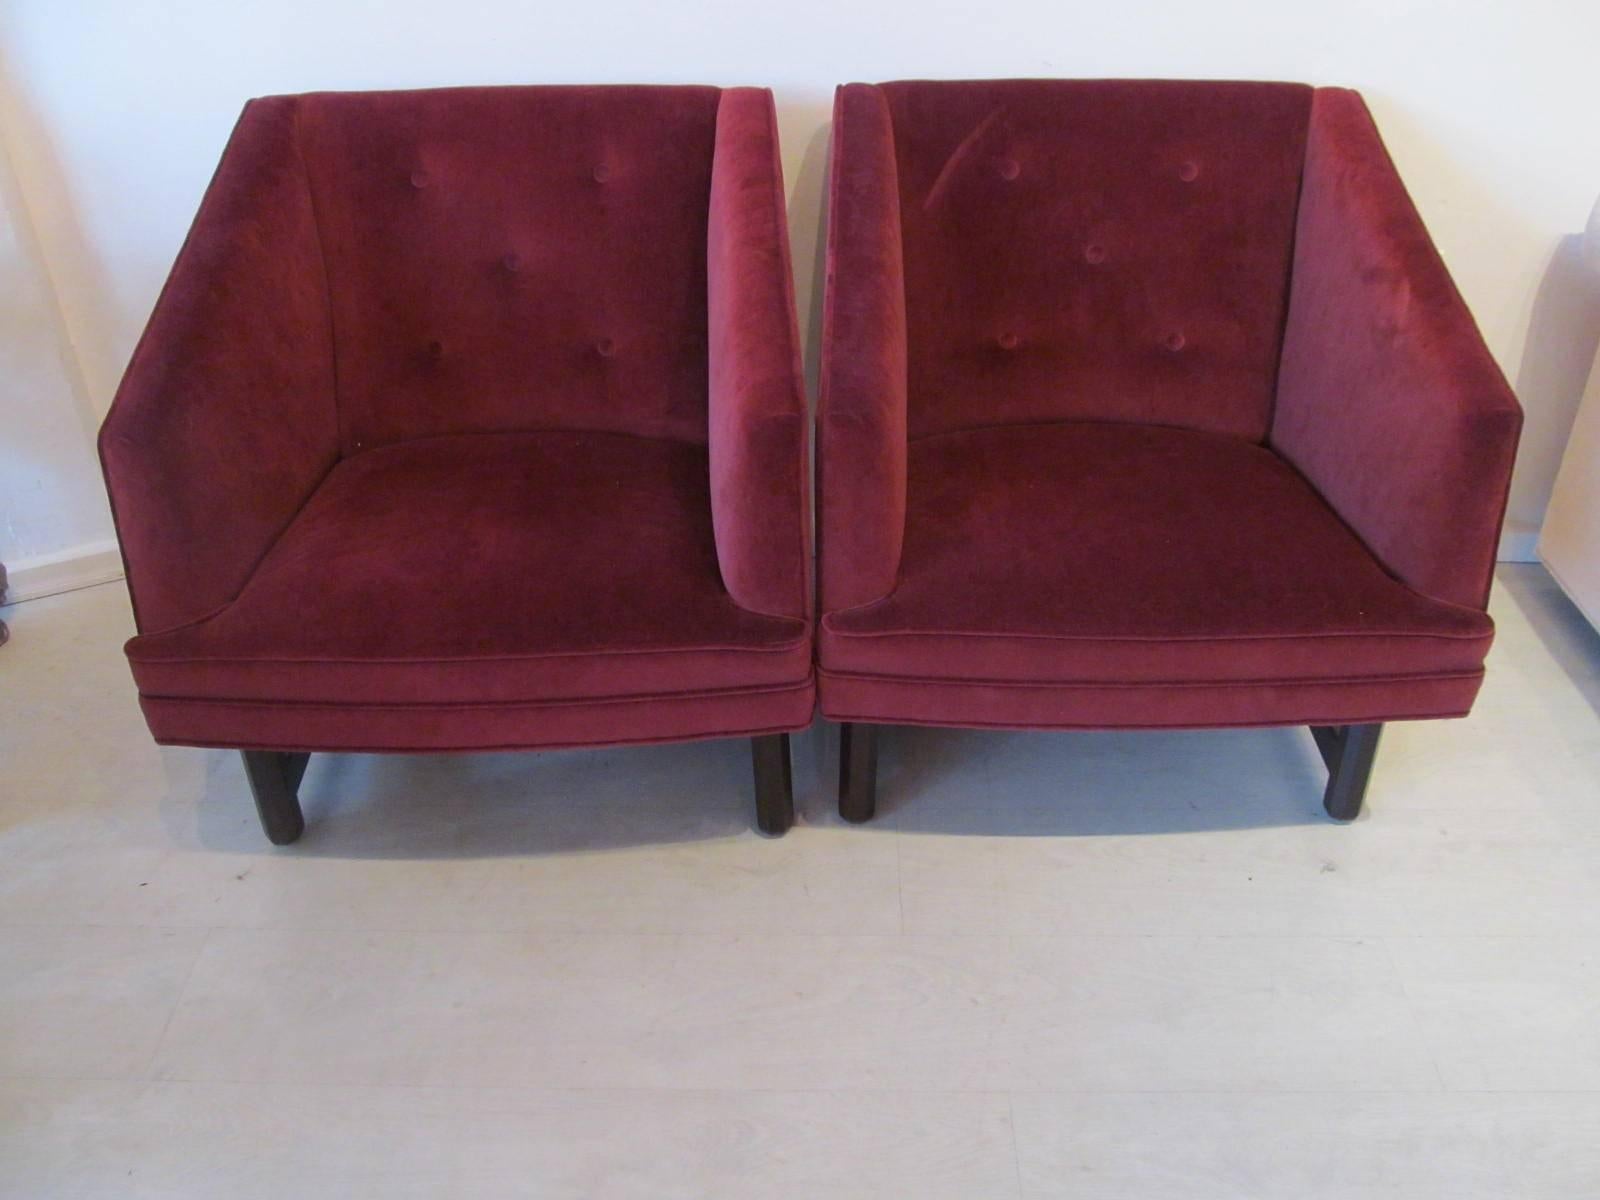 Excellent pair of refurbished and recovered Harvey Probber armchairs.